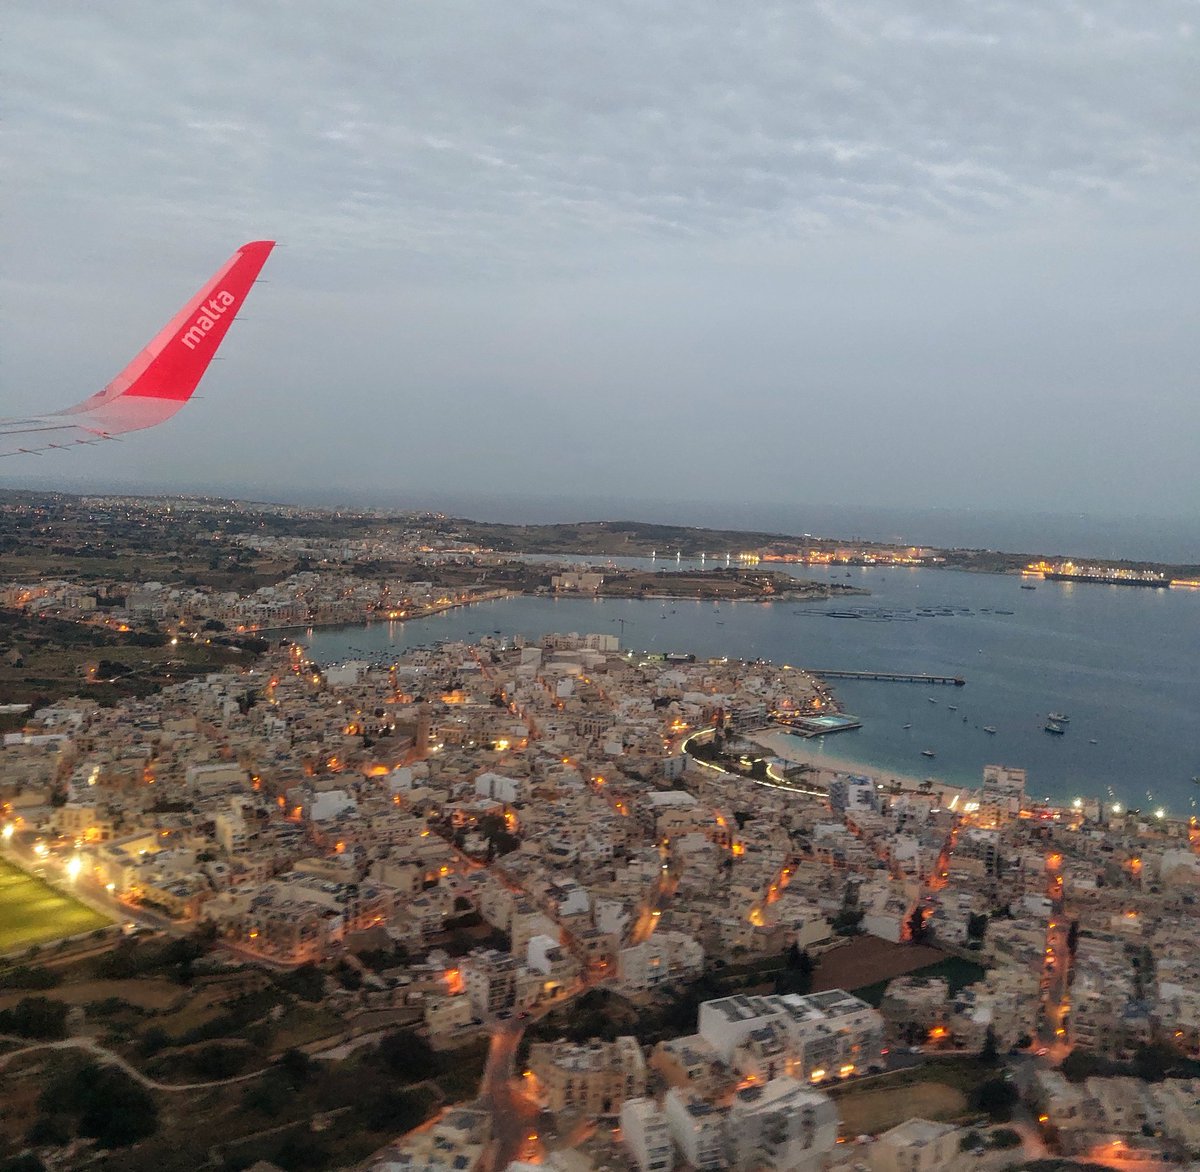 Just landed in Malta as a member of the @FreeTheEH3 campaign. Yesterday, only a few miles from here, a girl and eight adults drowned in yet another shipwreck. Meanwhile, in Brussels, a migration pact was agreed that makes these atrocities even more likely in the future.